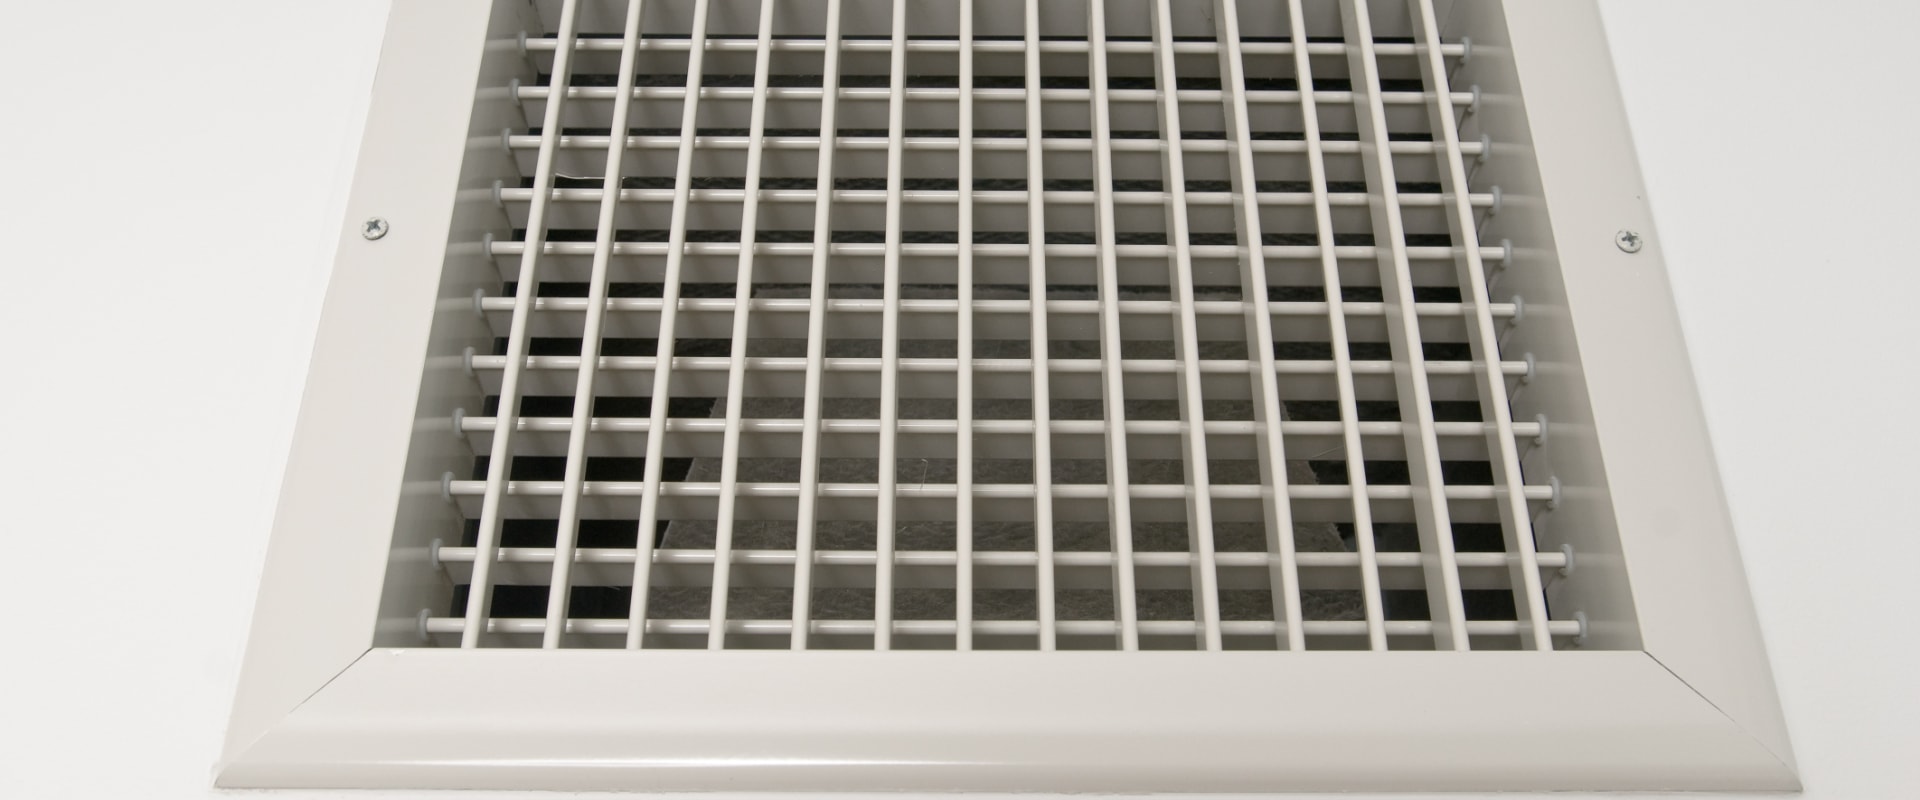 Maintaining Your 20x25x1 Air Filter for Optimal Performance